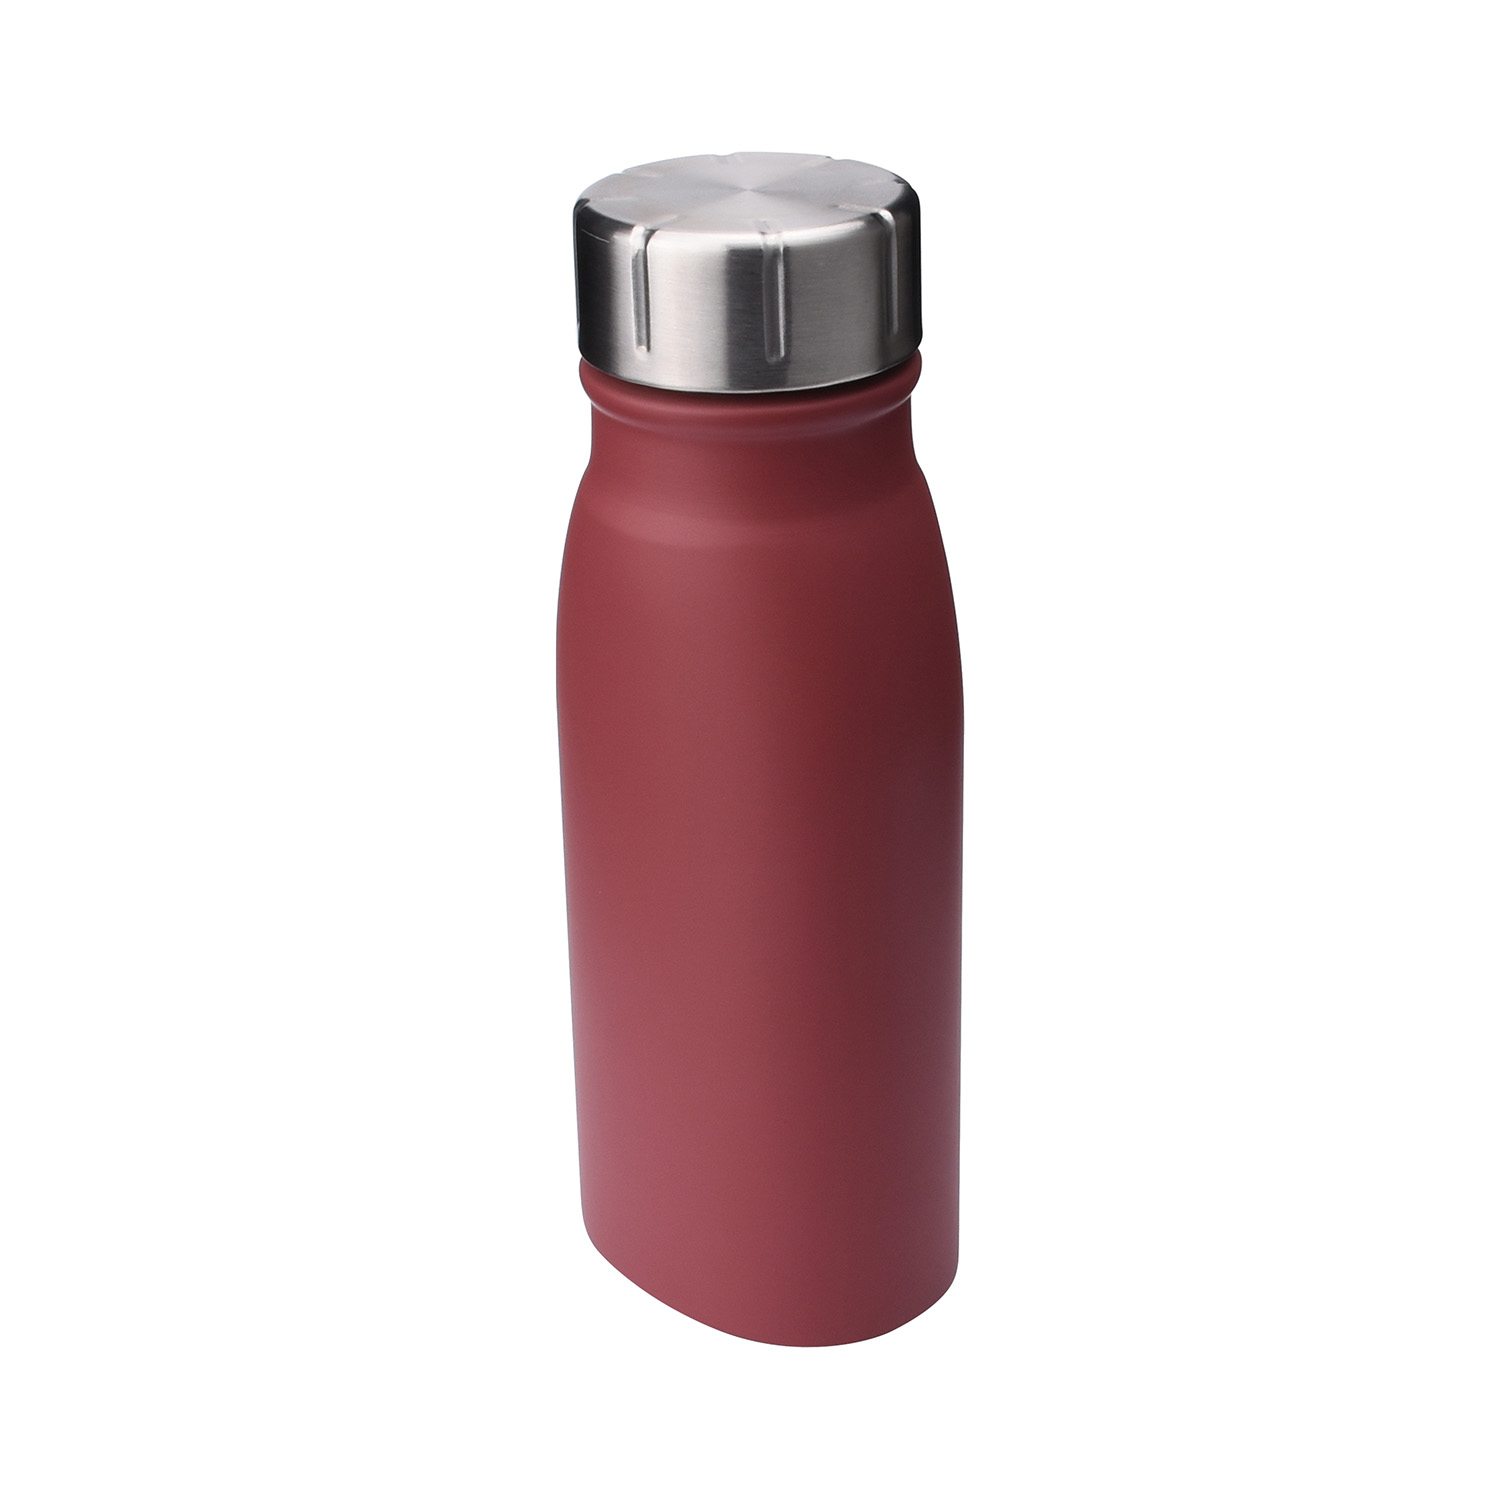 Stainless Steel Thermo Drinking Bottles - powder coated available